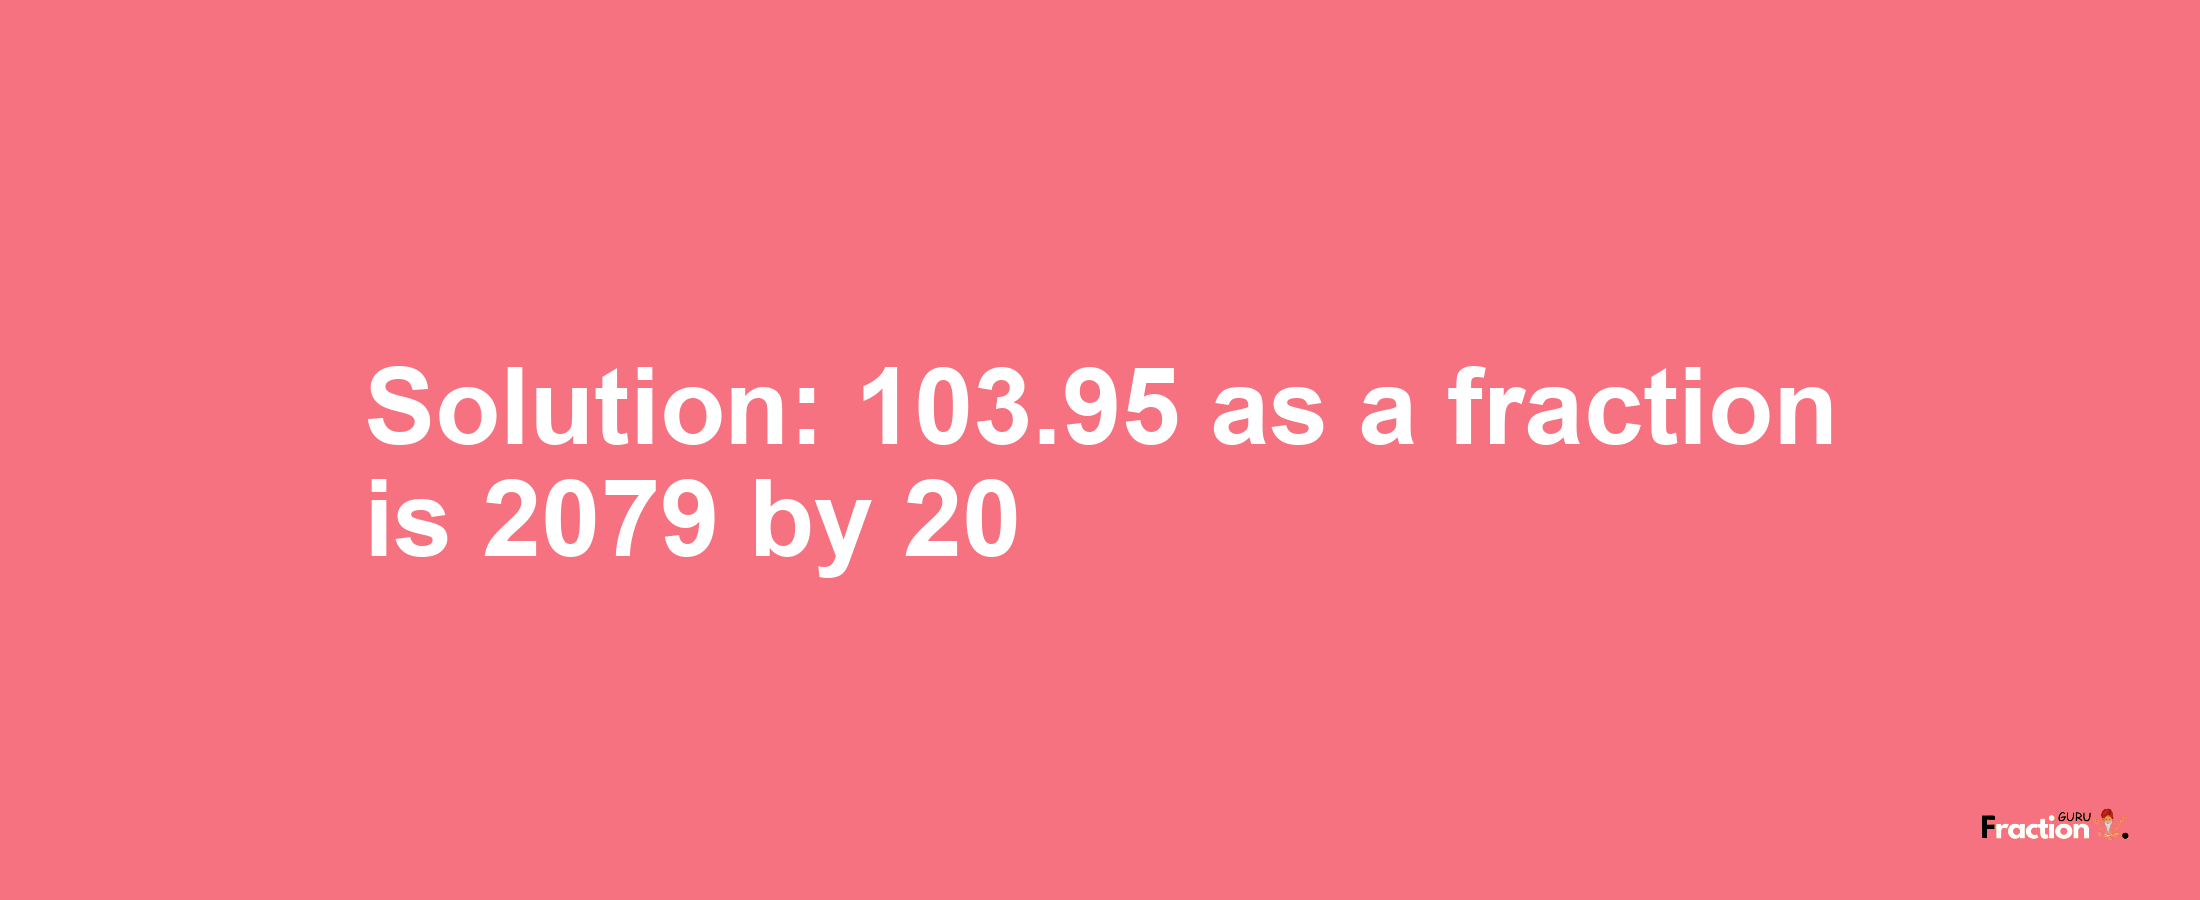 Solution:103.95 as a fraction is 2079/20